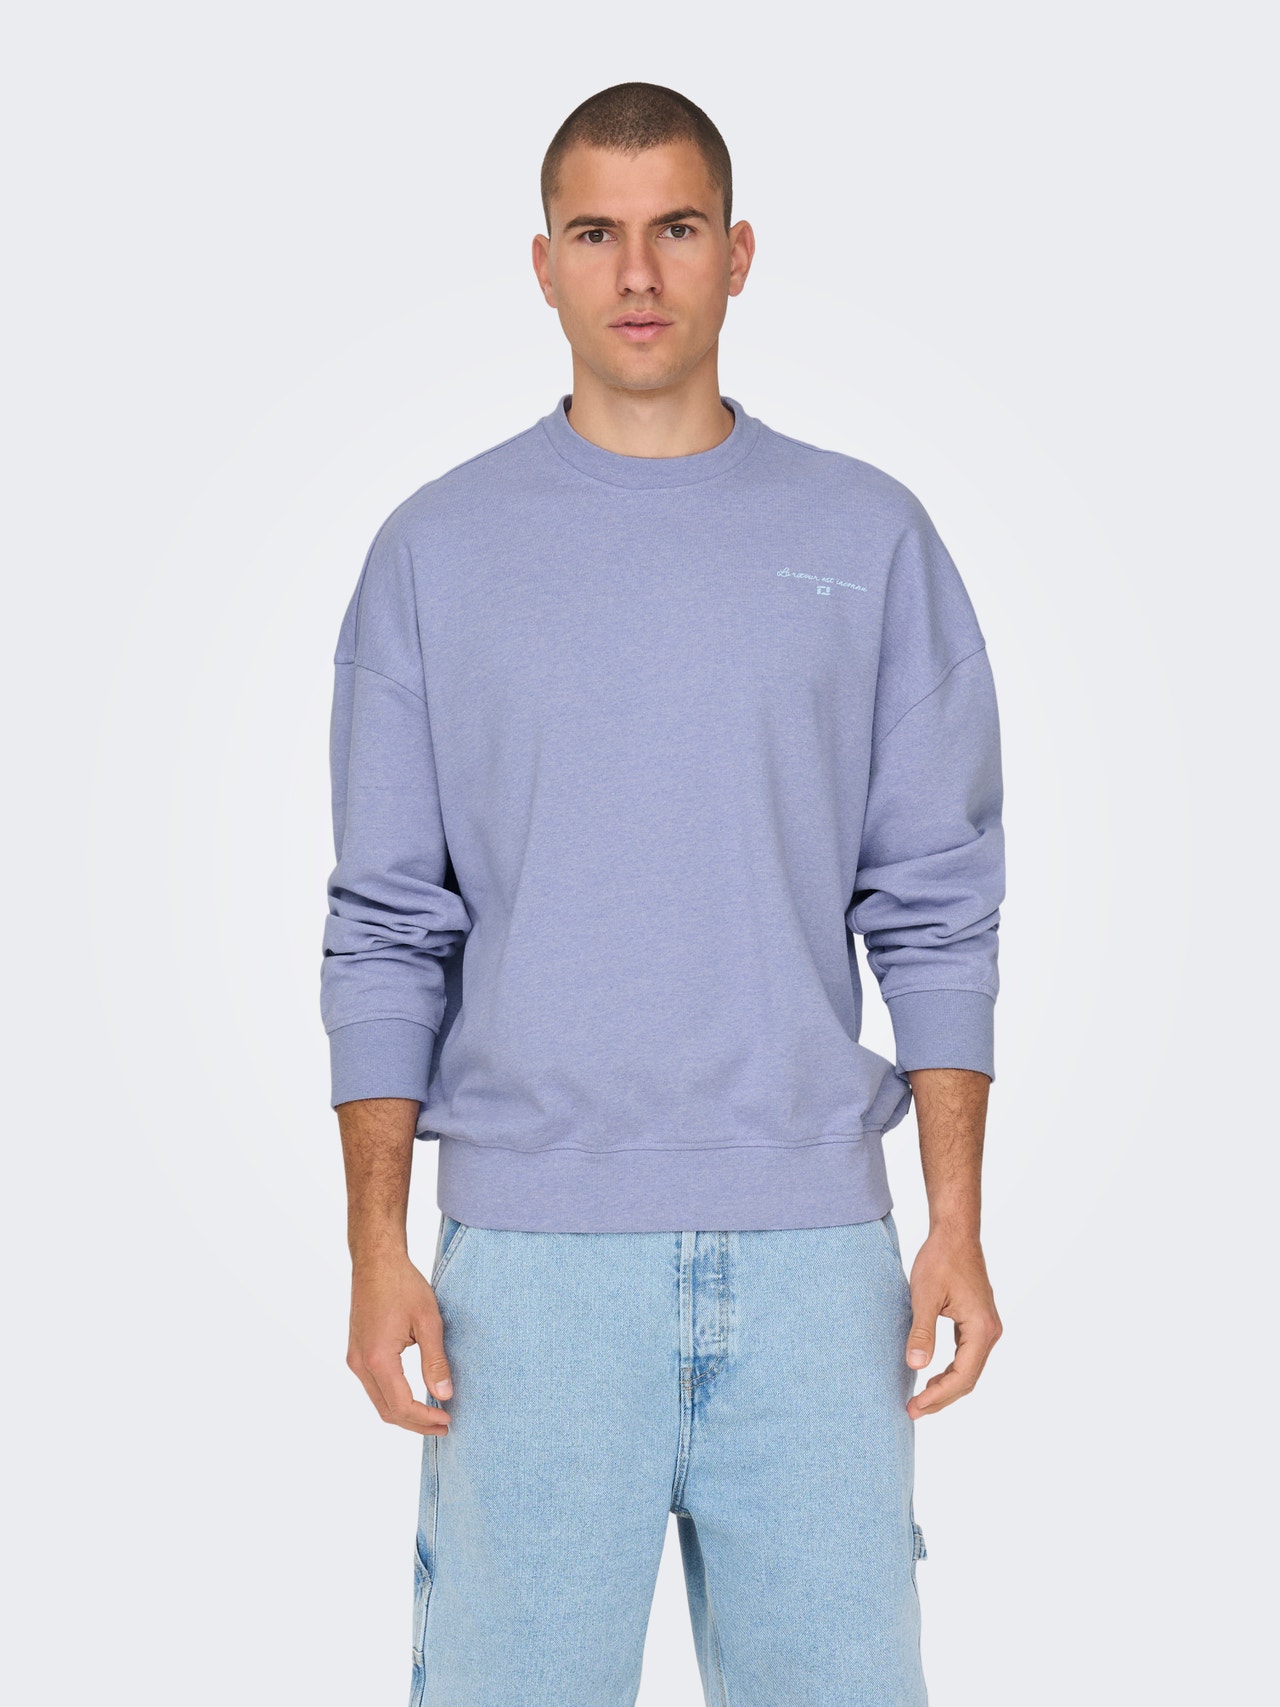 ONLY & SONS Felpe Relaxed Fit Girocollo Spalle cadenti -Jacaranda - 22025298